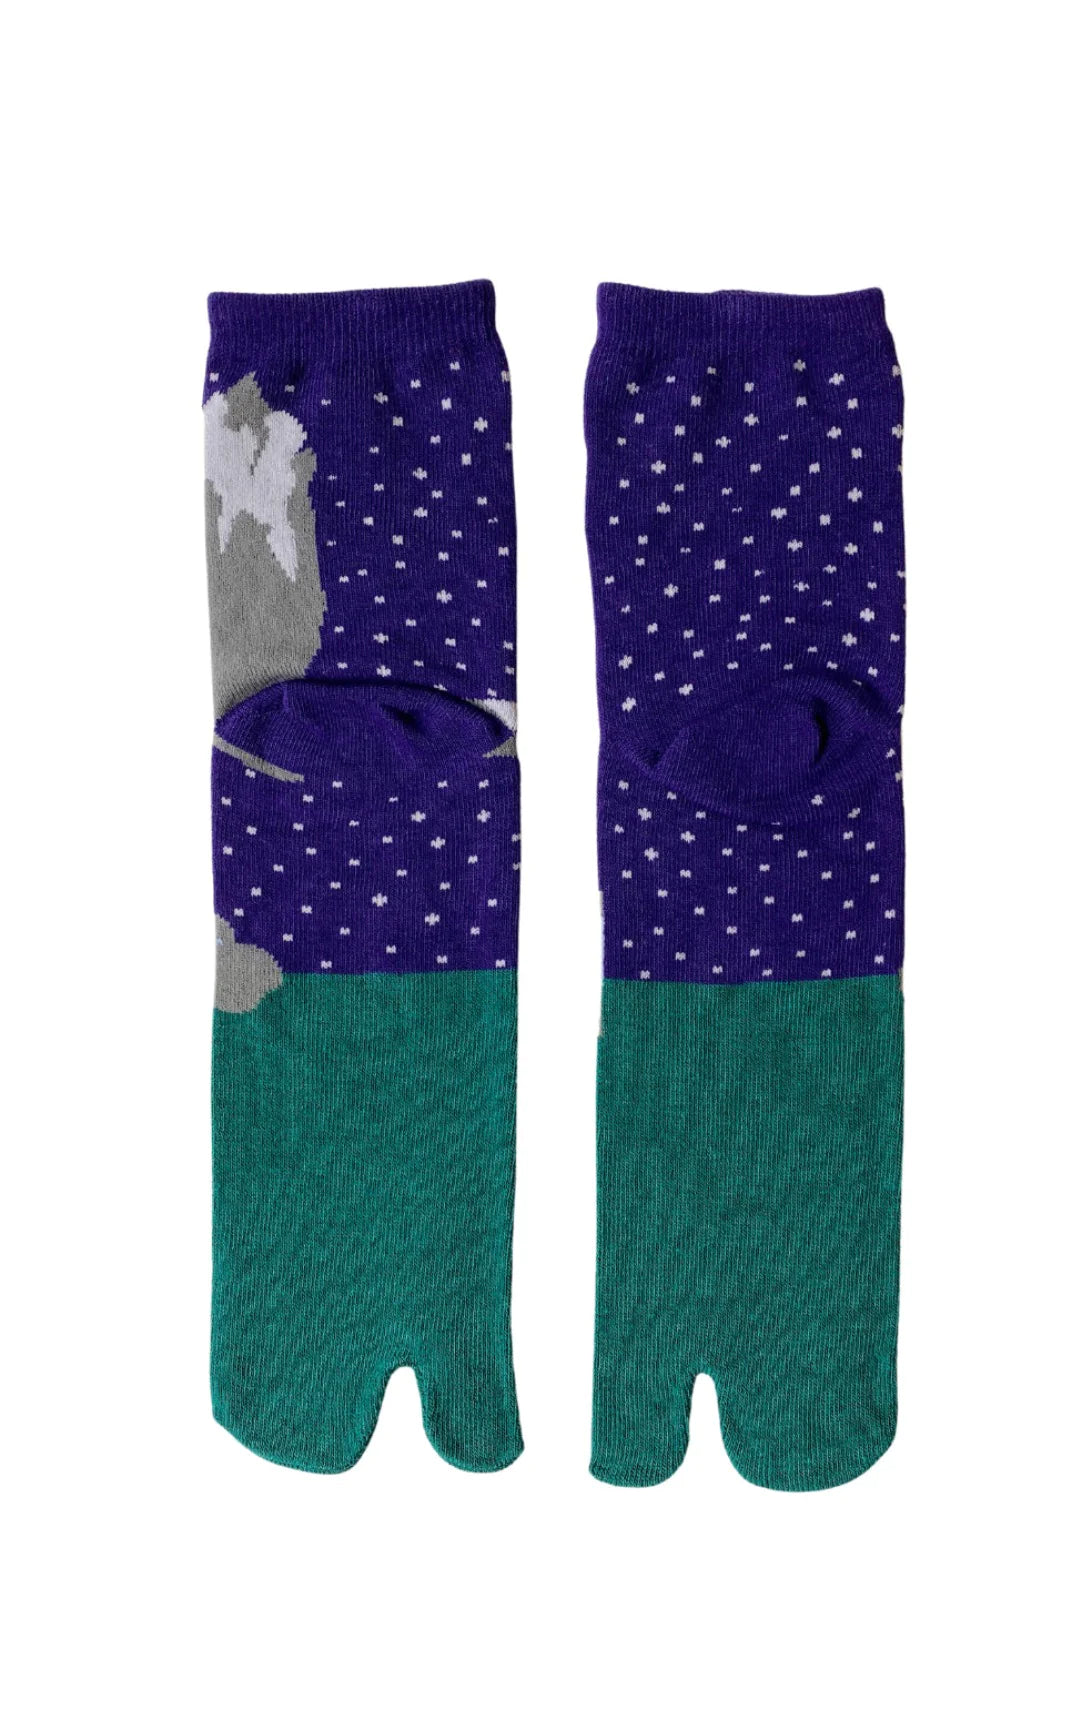 Socks by NINJA SOCKS named Onsen Monkey Saru Tabi Toe Socks, back view in PURPLE GREEN color with a design of a monkey in a hot spring